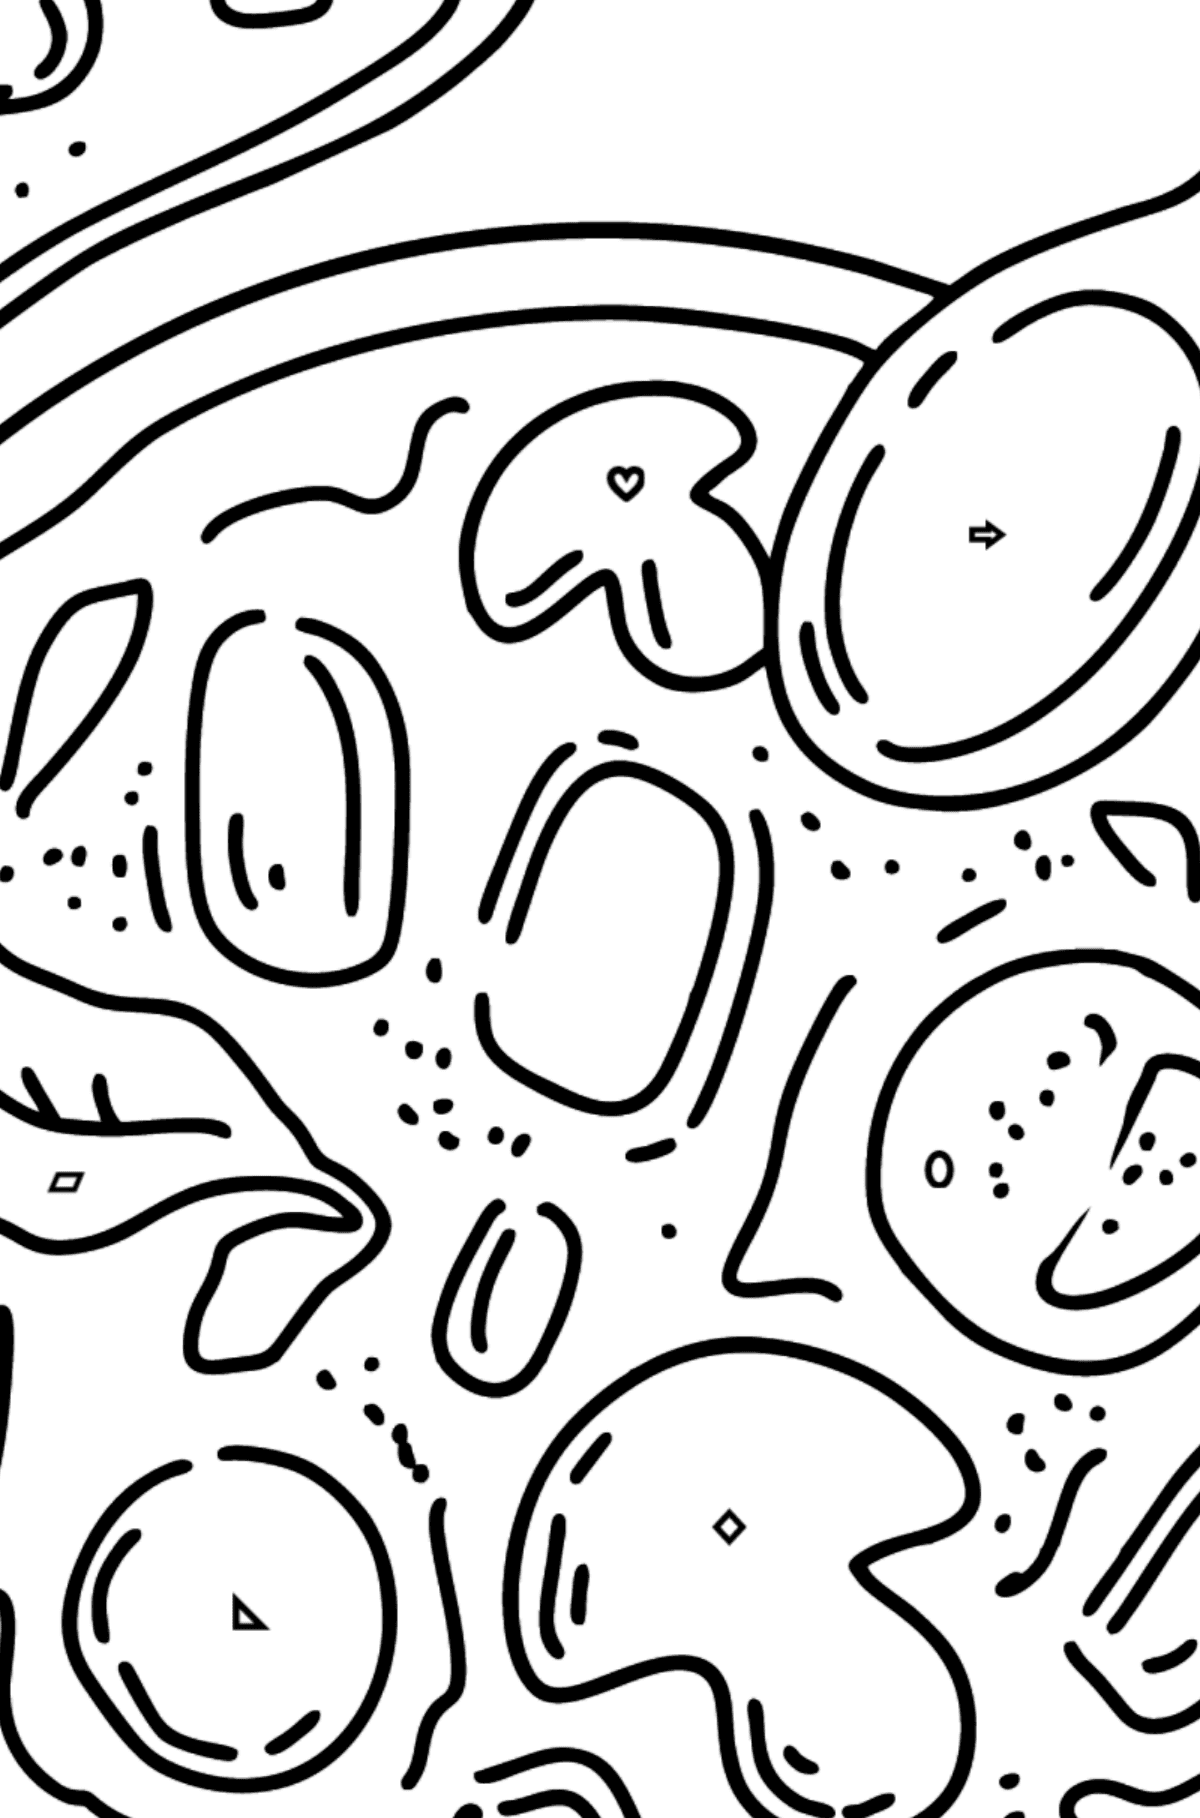 Lunch coloring page - soup - Coloring by Geometric Shapes for Kids